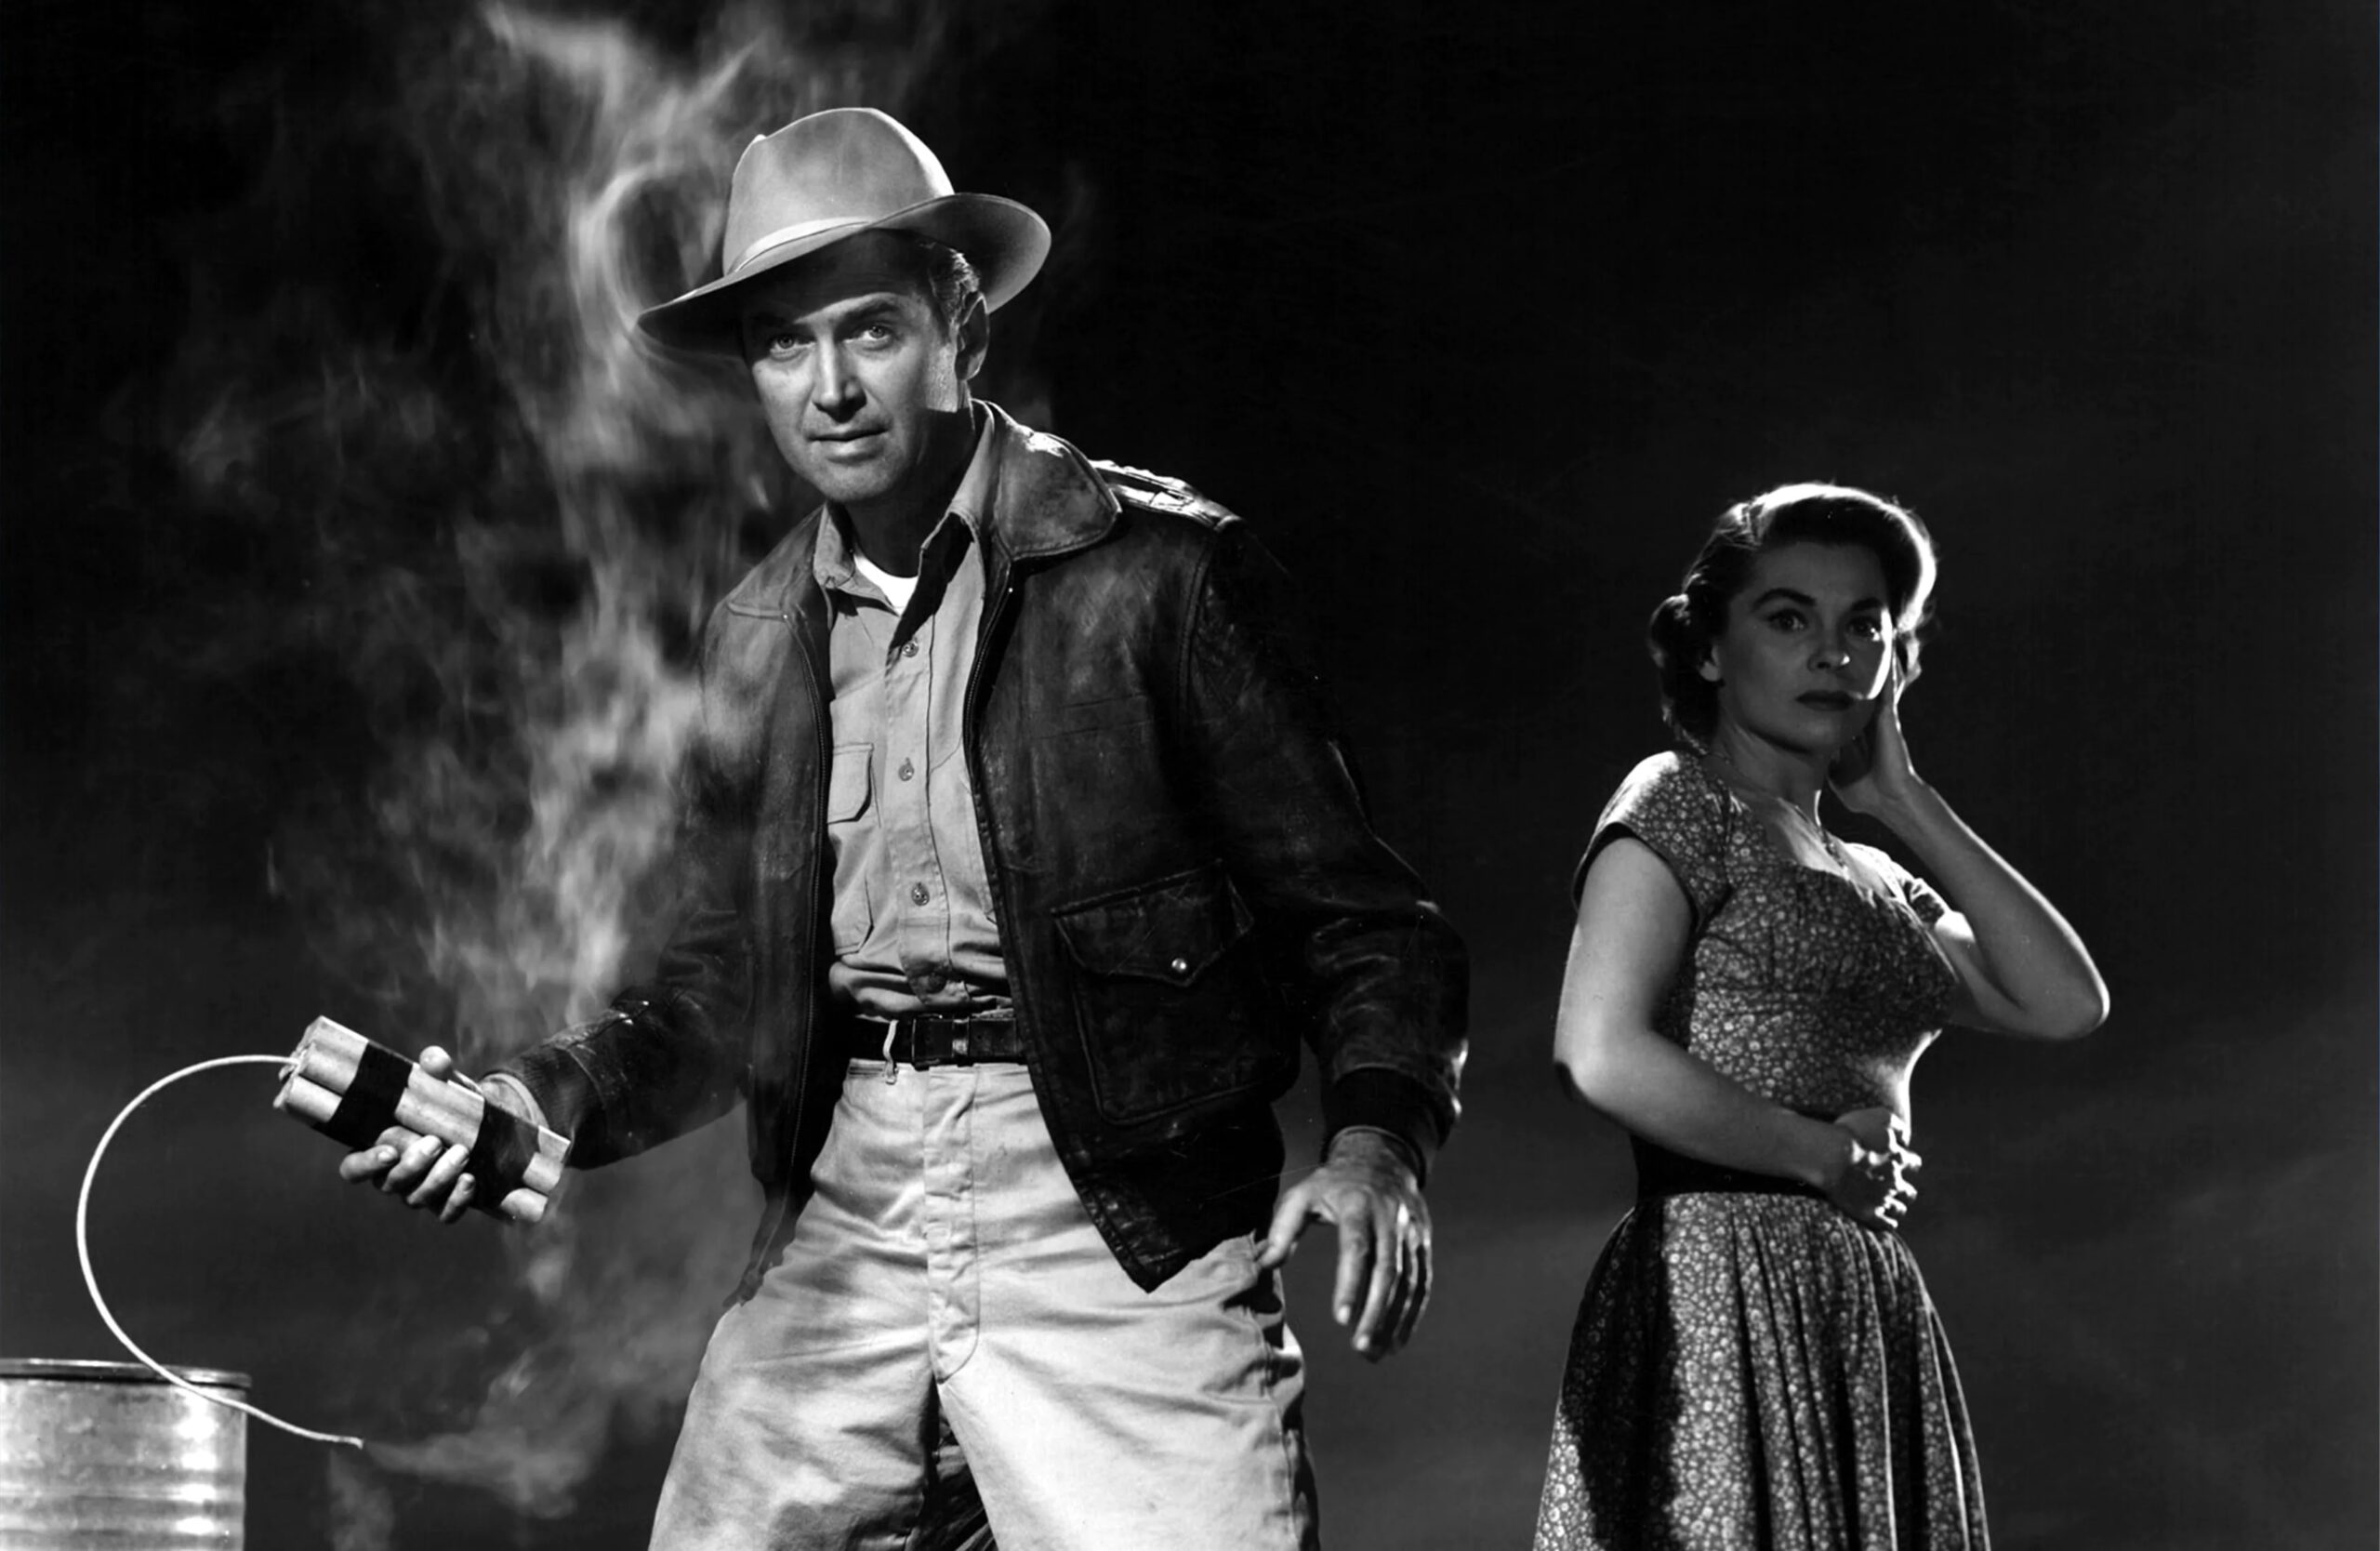 Black and white promotional image from the 1953 Anthony Mann film "Thunder Bay", starring James Stewart